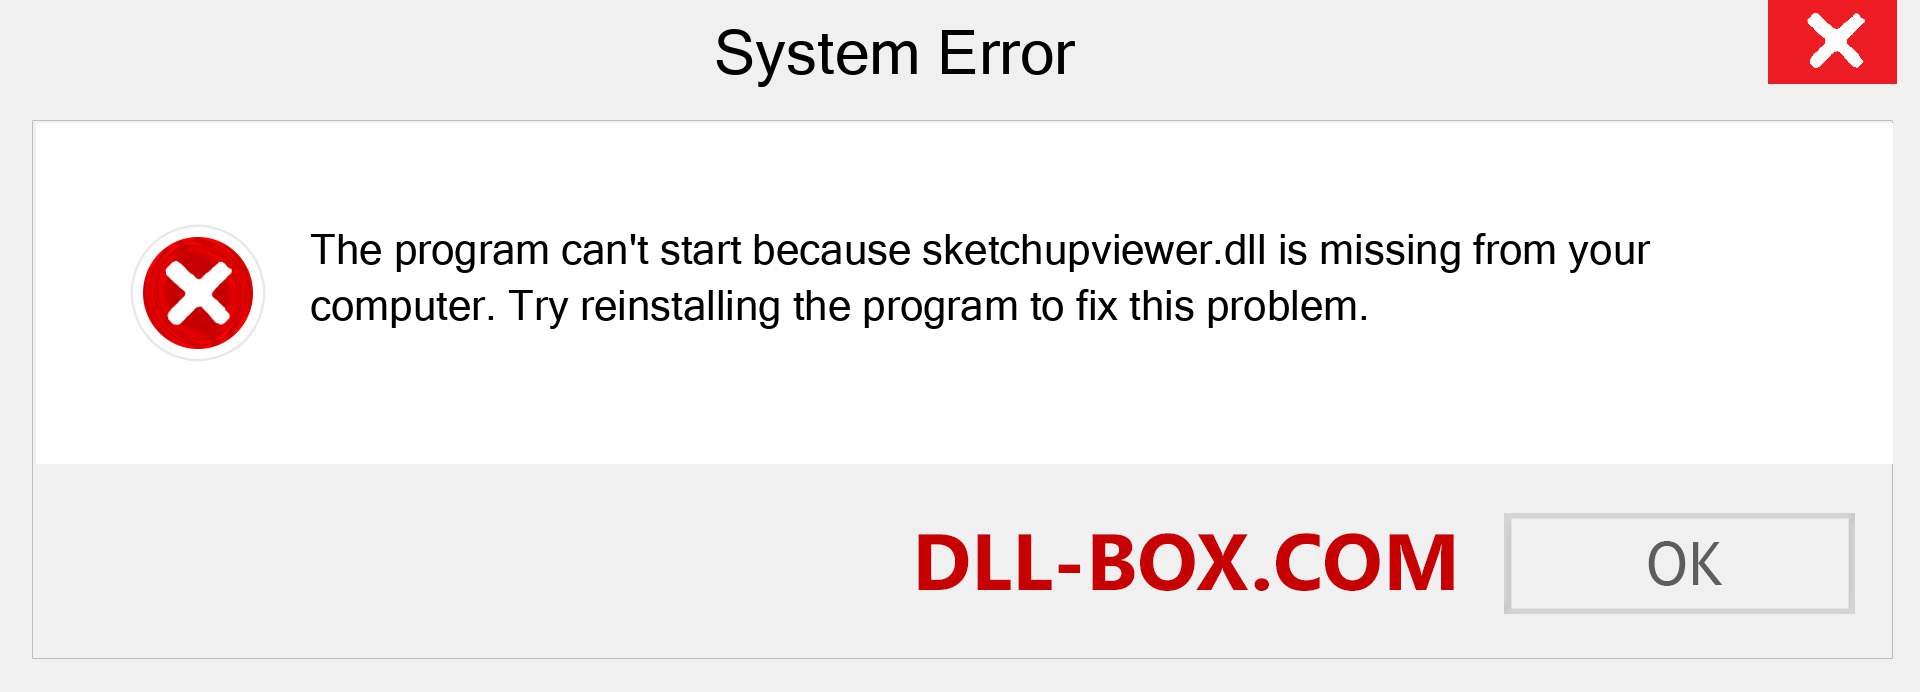  sketchupviewer.dll file is missing?. Download for Windows 7, 8, 10 - Fix  sketchupviewer dll Missing Error on Windows, photos, images